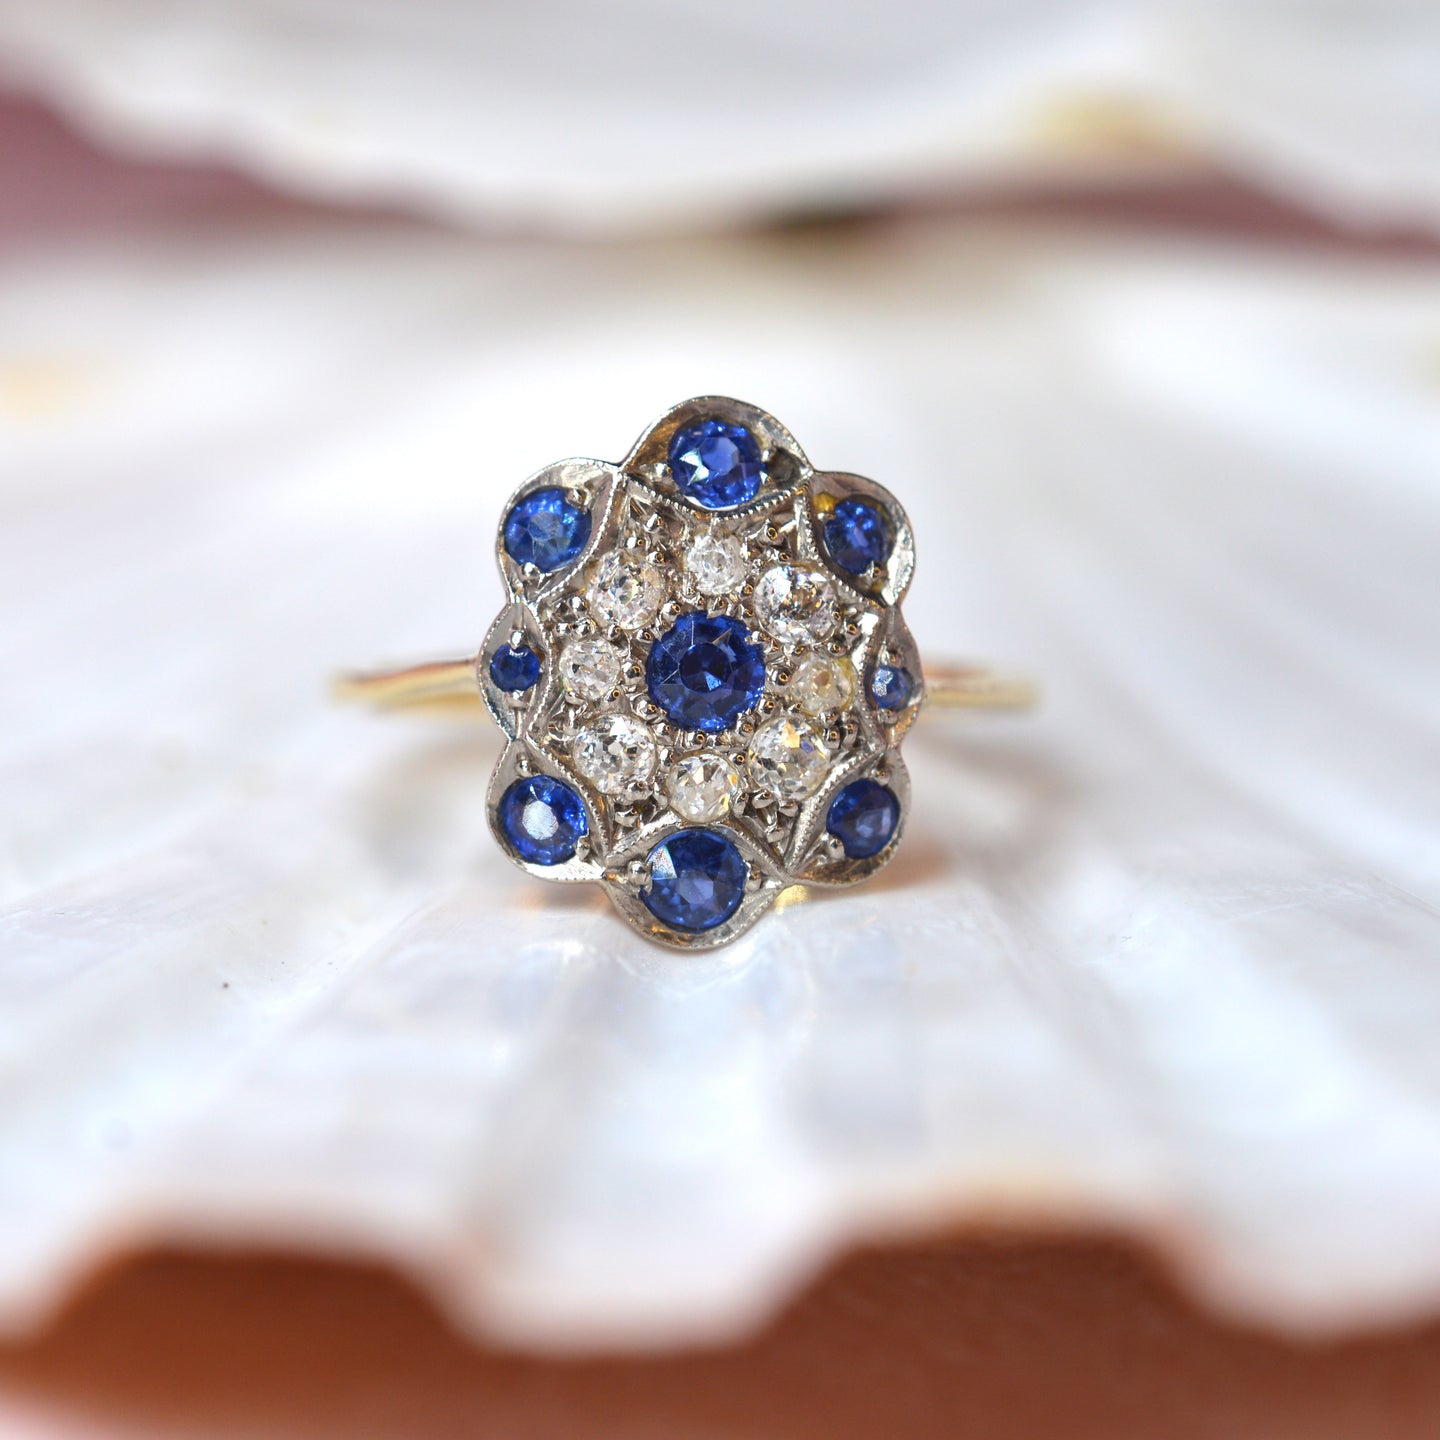 Why Vintage Engagement Rings Appeal To Modern Customers